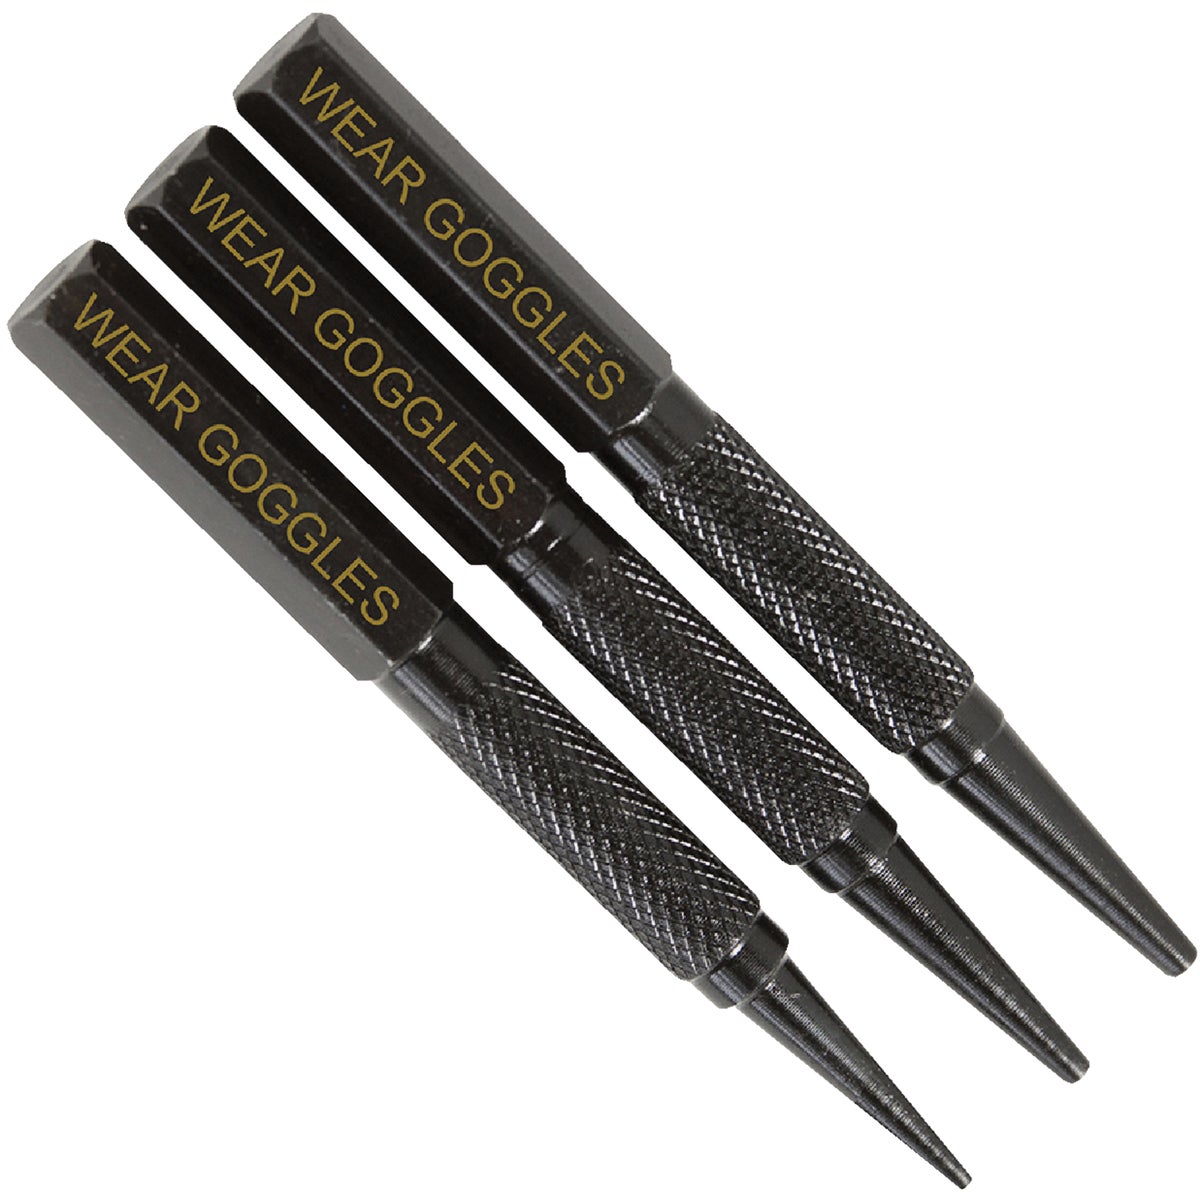 Dasco Assorted 5 In. High Carbon Steel Nail Set (3-Piece)